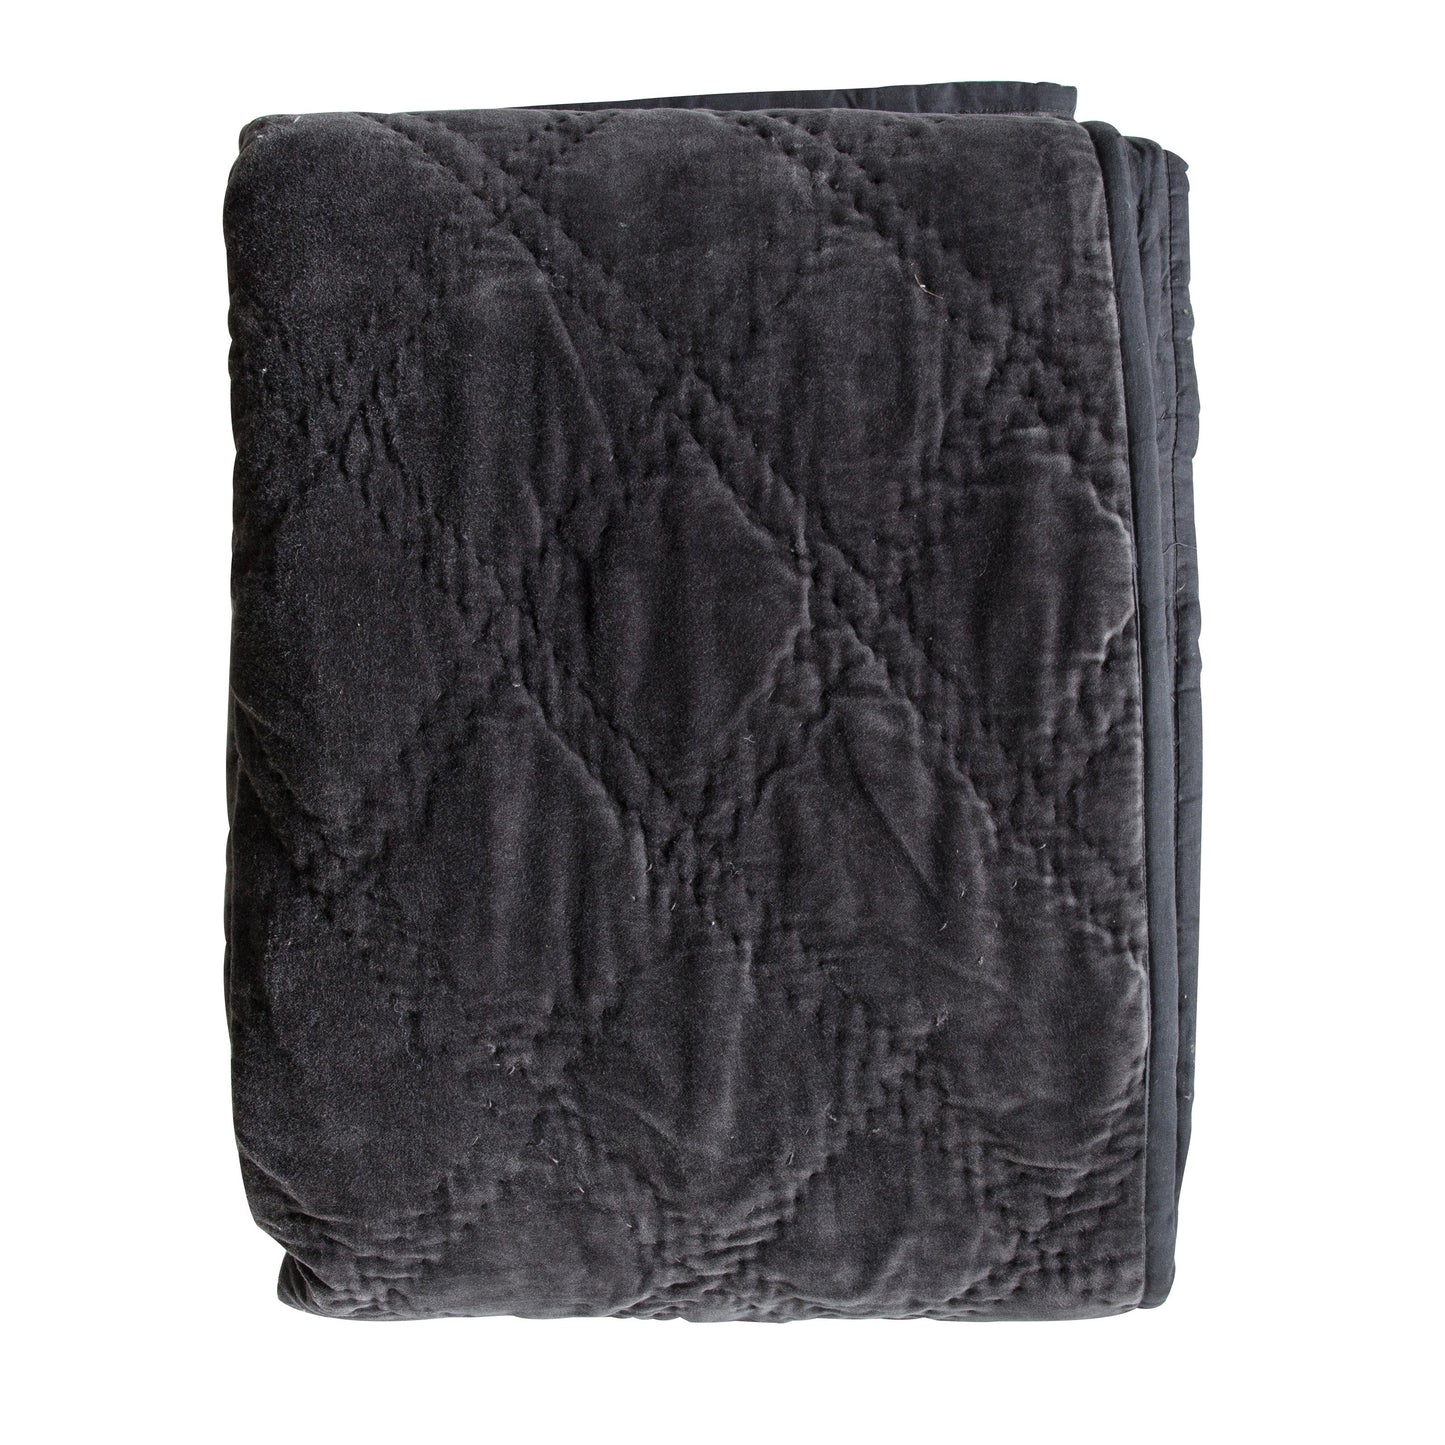 Quilted Cotton Velvet Bedsp Charcoal 2400x2600mm